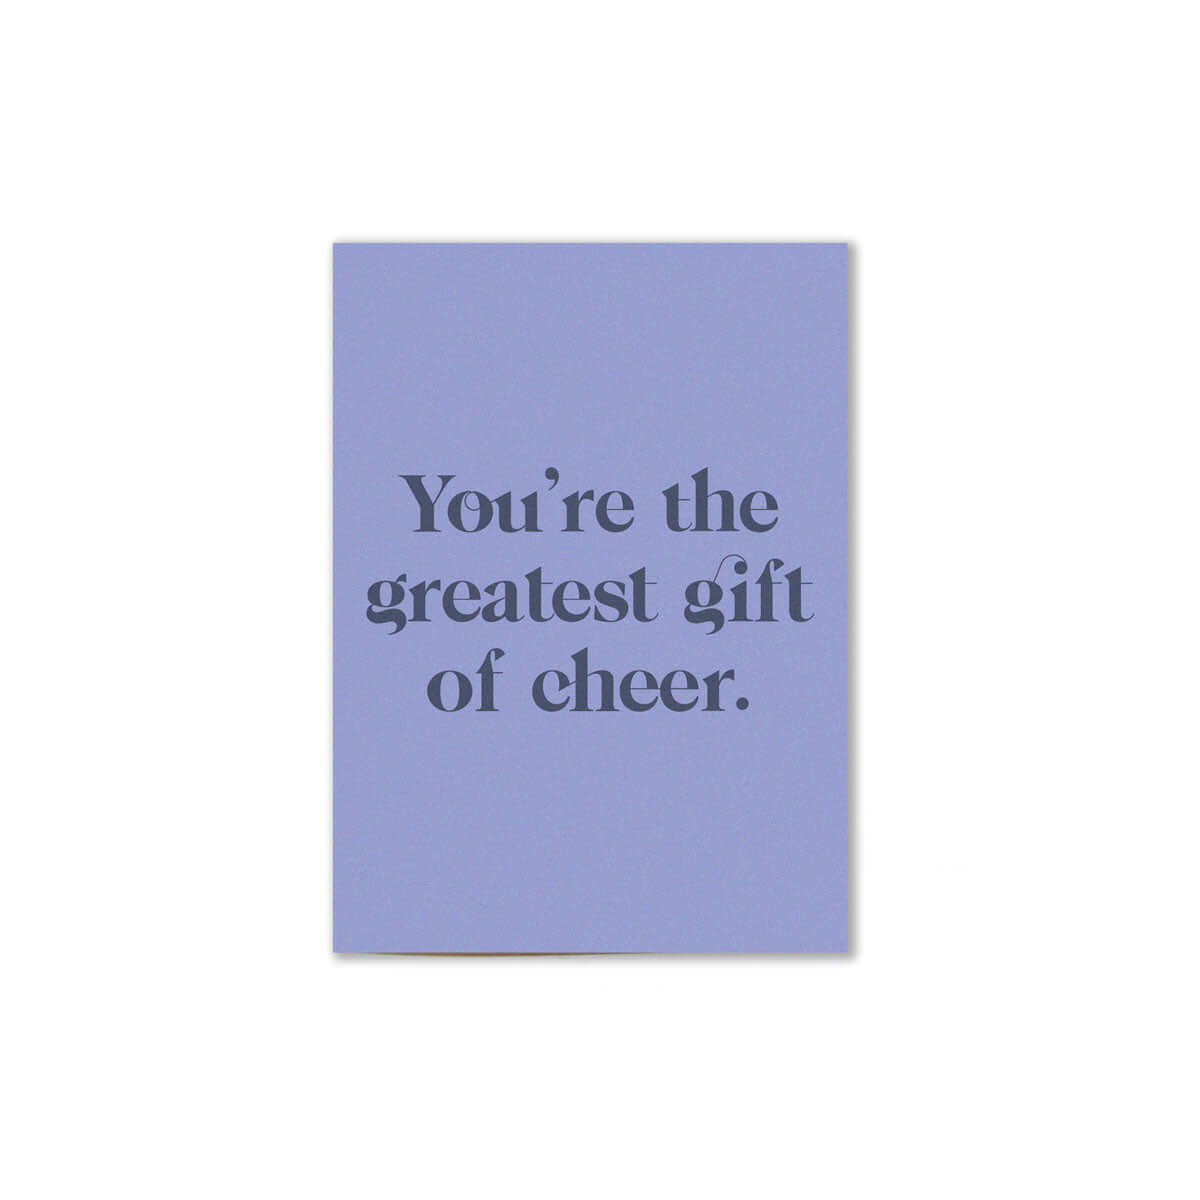 blue gift of cheer gratitude card that reads "you're the greatest gift of cheer"